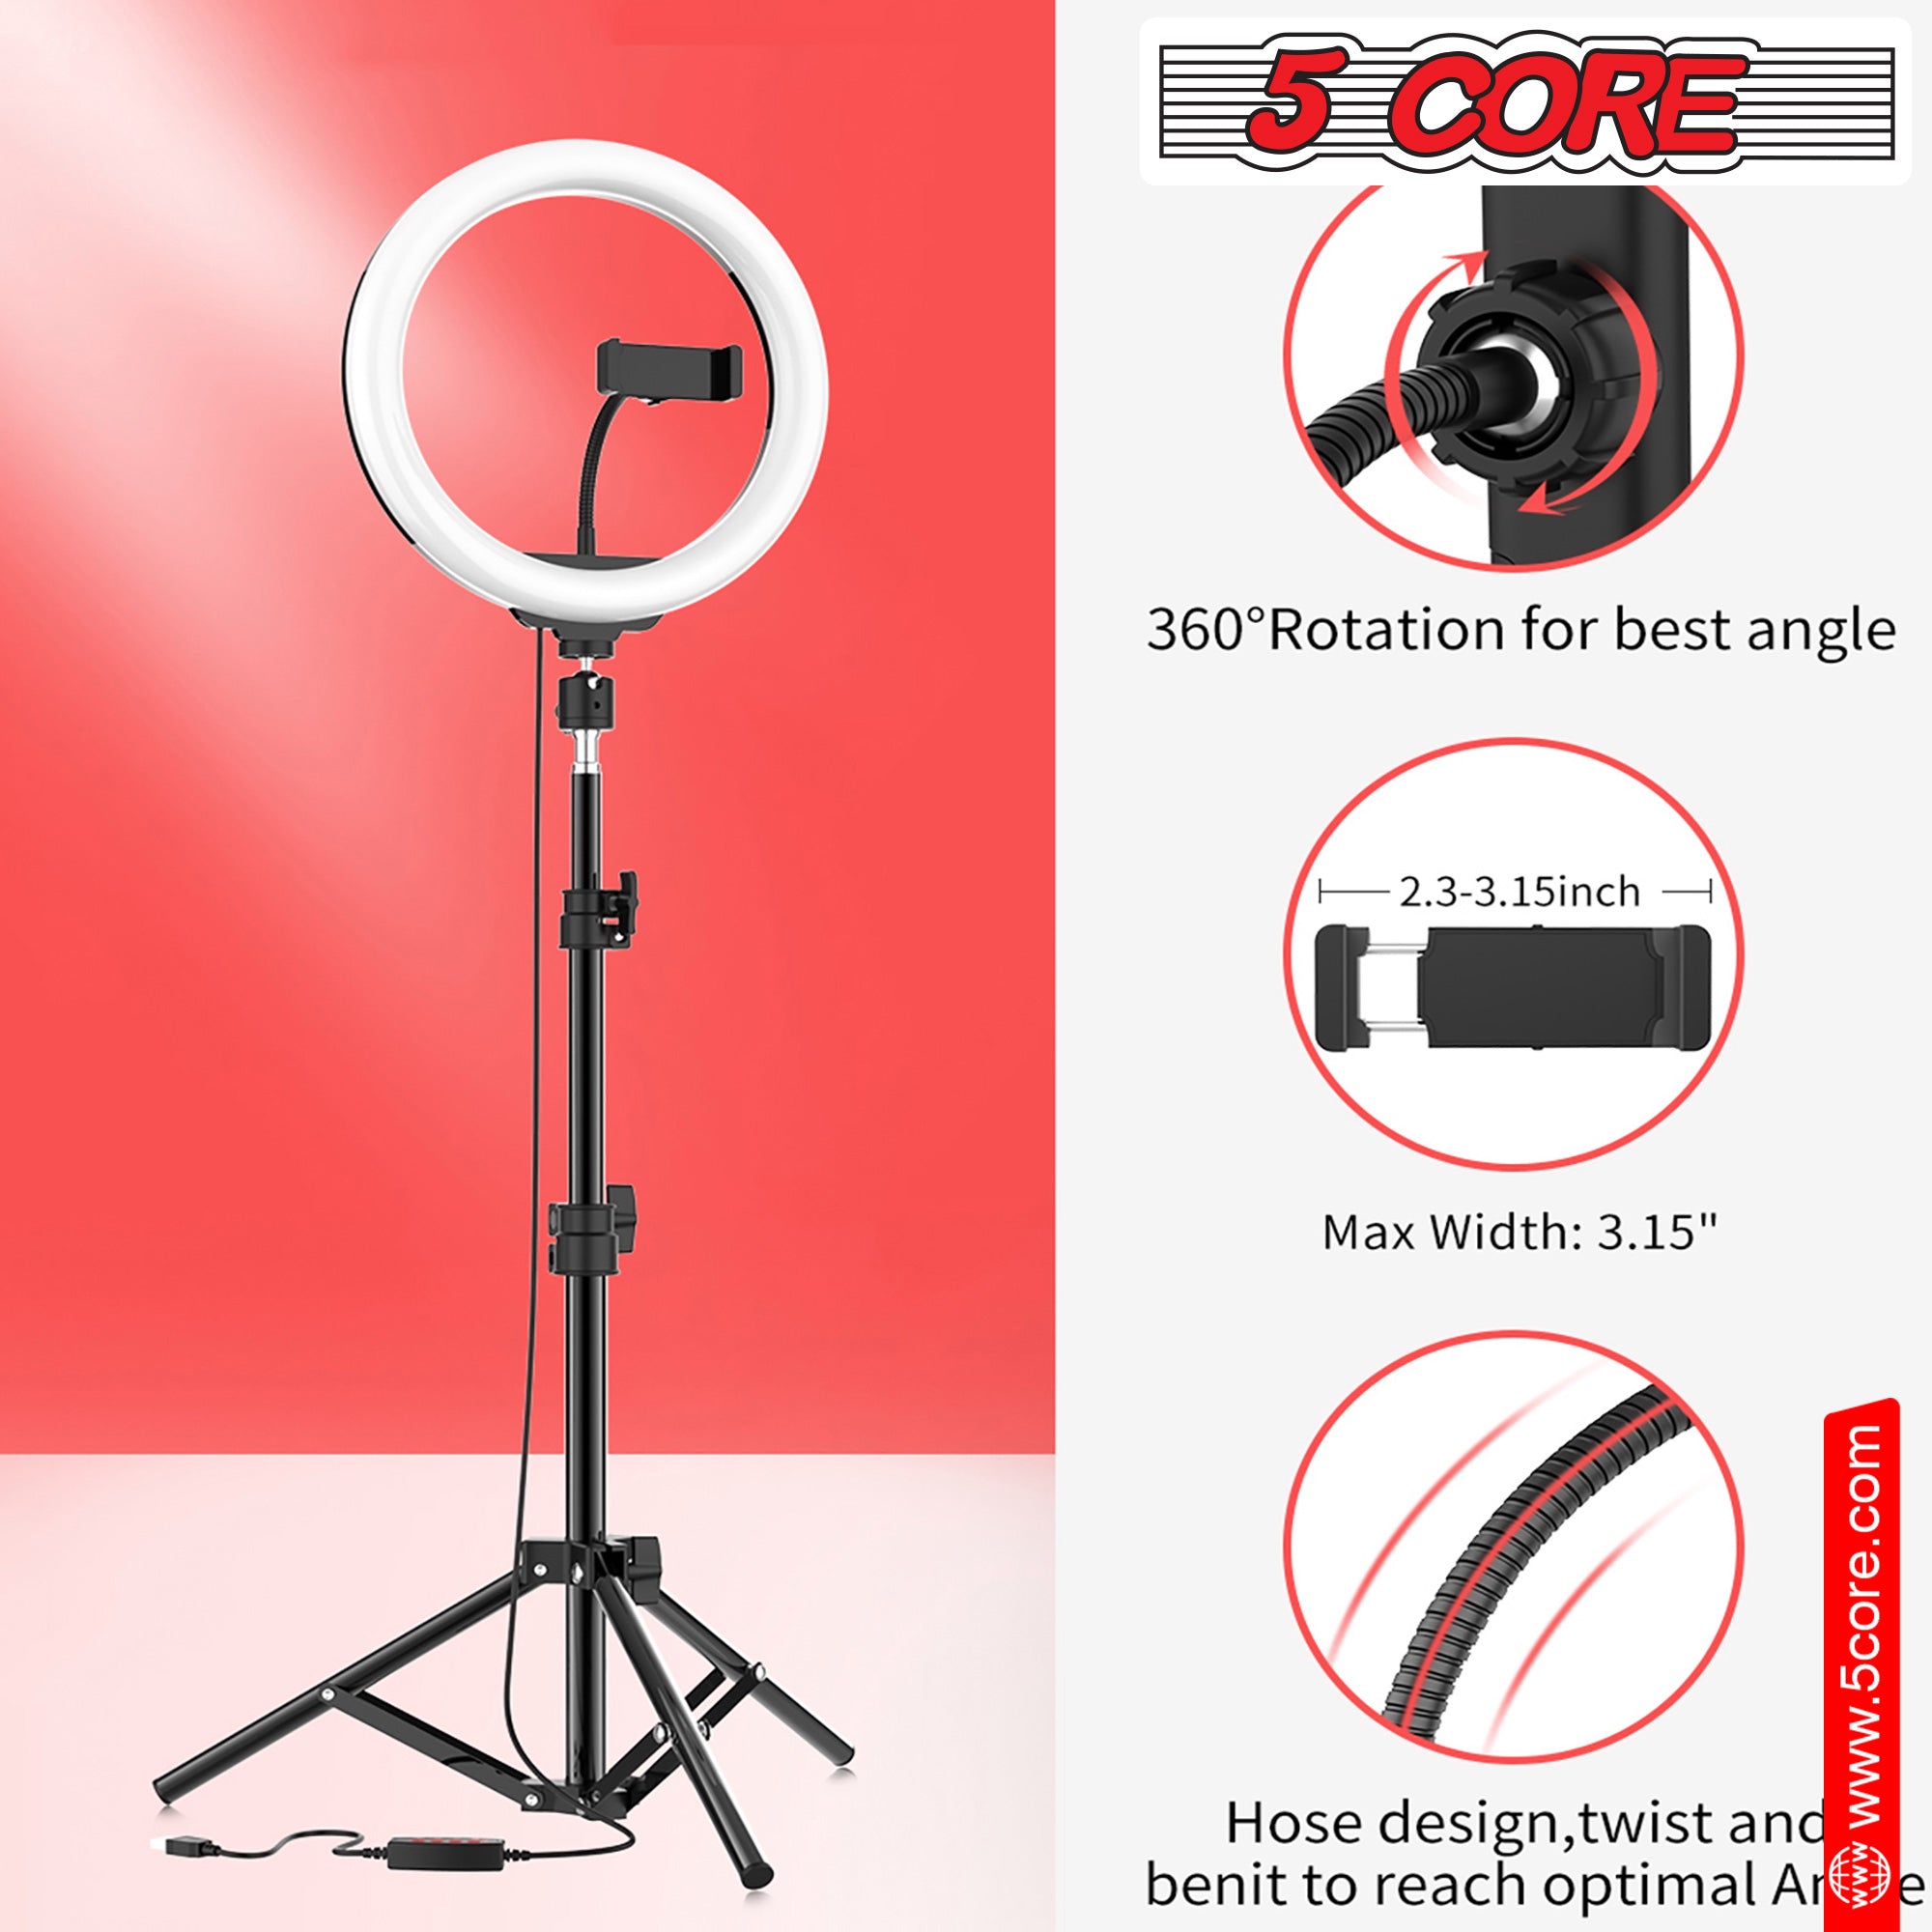 5 Core Ring Light 10 Inch W Tripod Phone Stand Adjustable Selfie Lights For Makeup Recording Podcast Streaming w Remote Included - RL 10